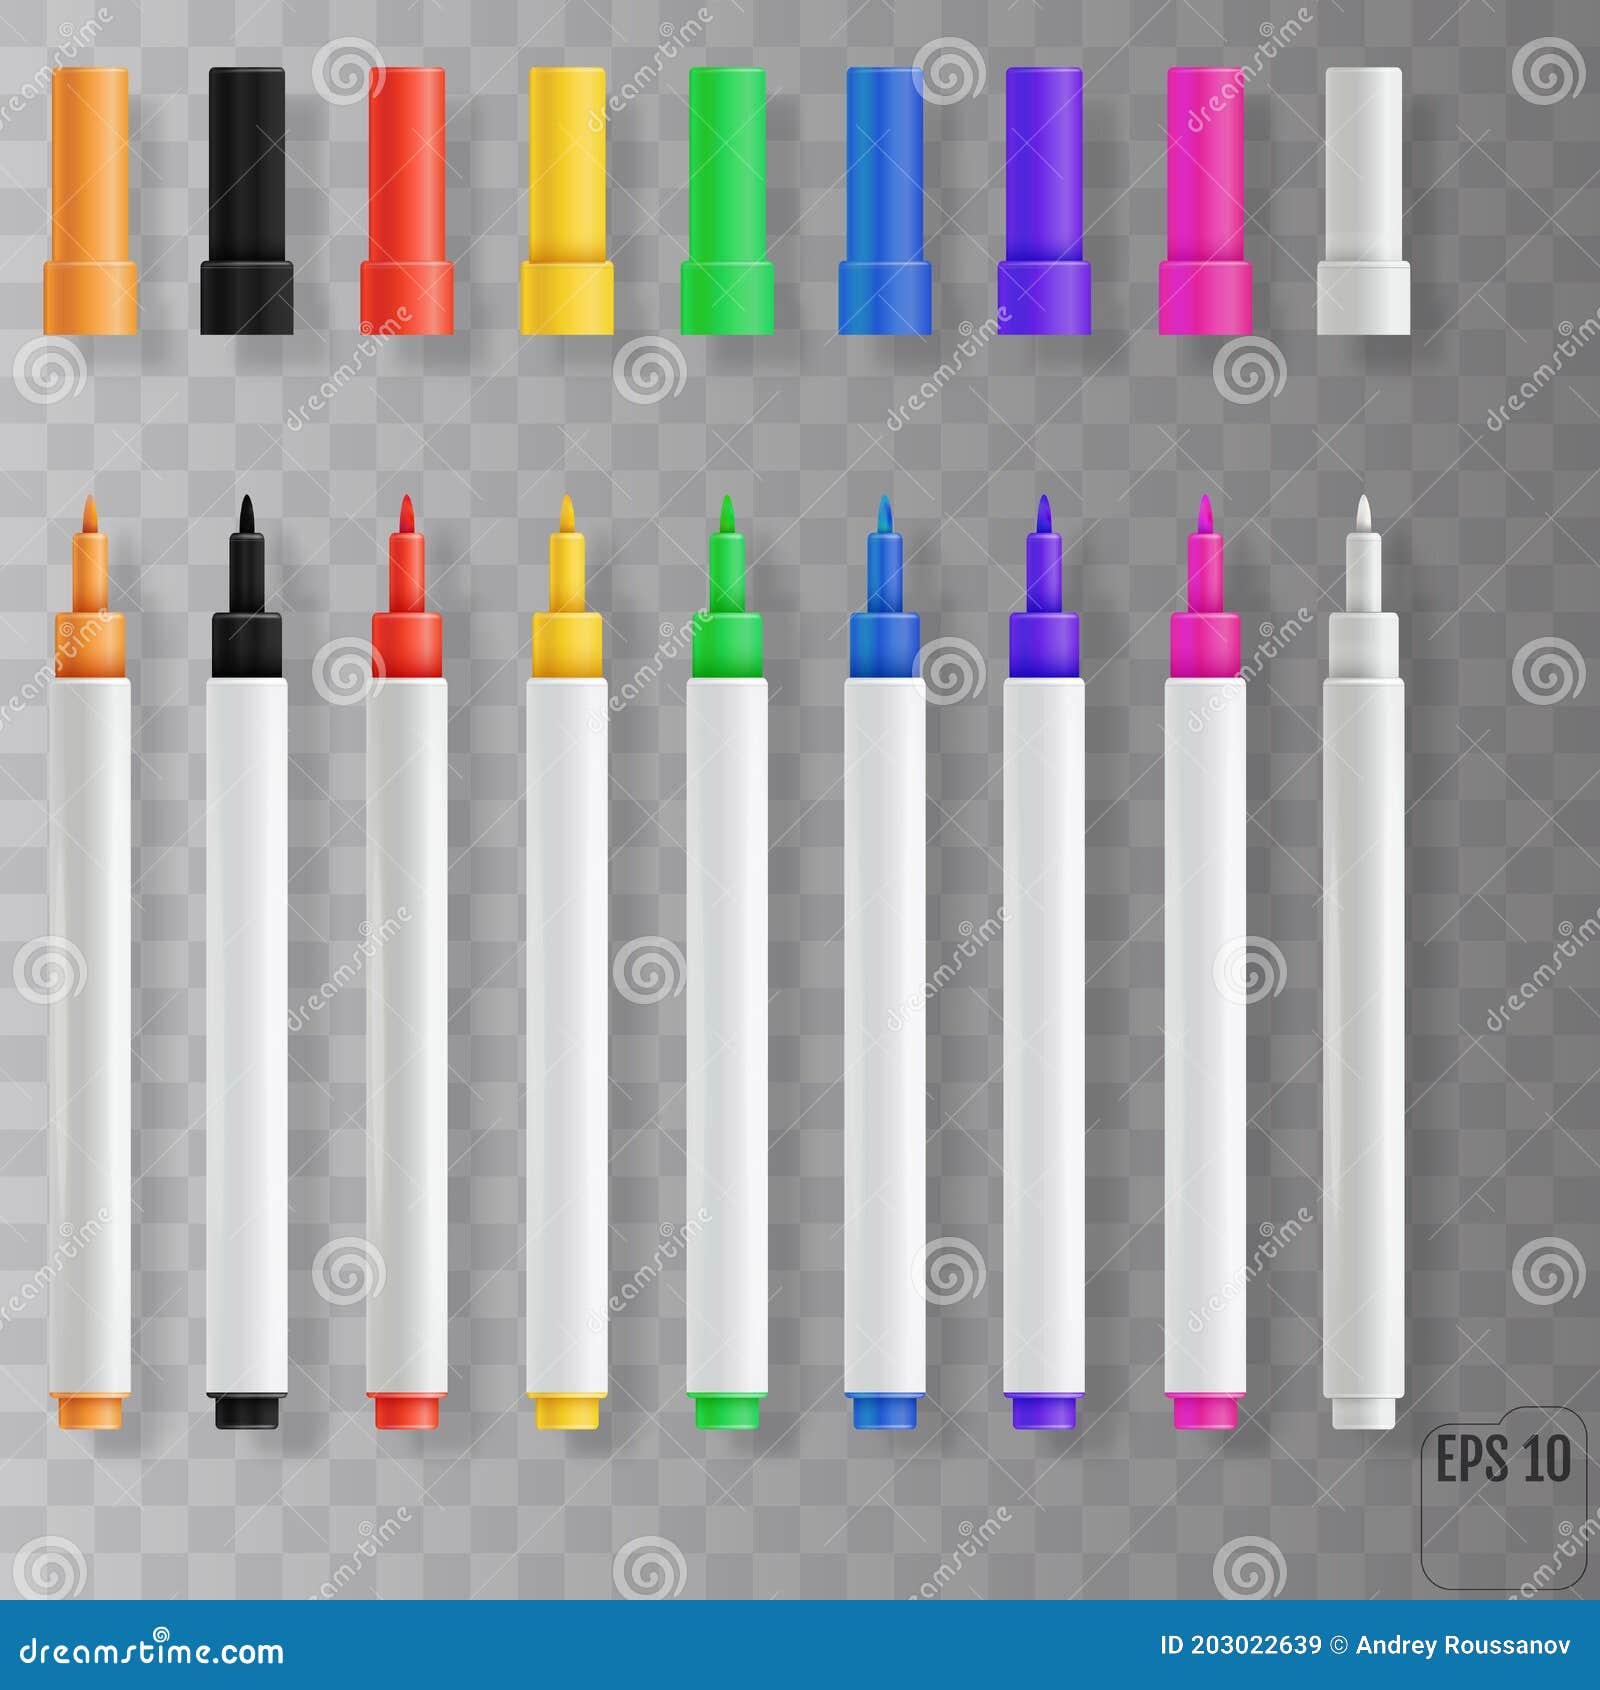 Pens pencil markers set isolated on white Vector Image